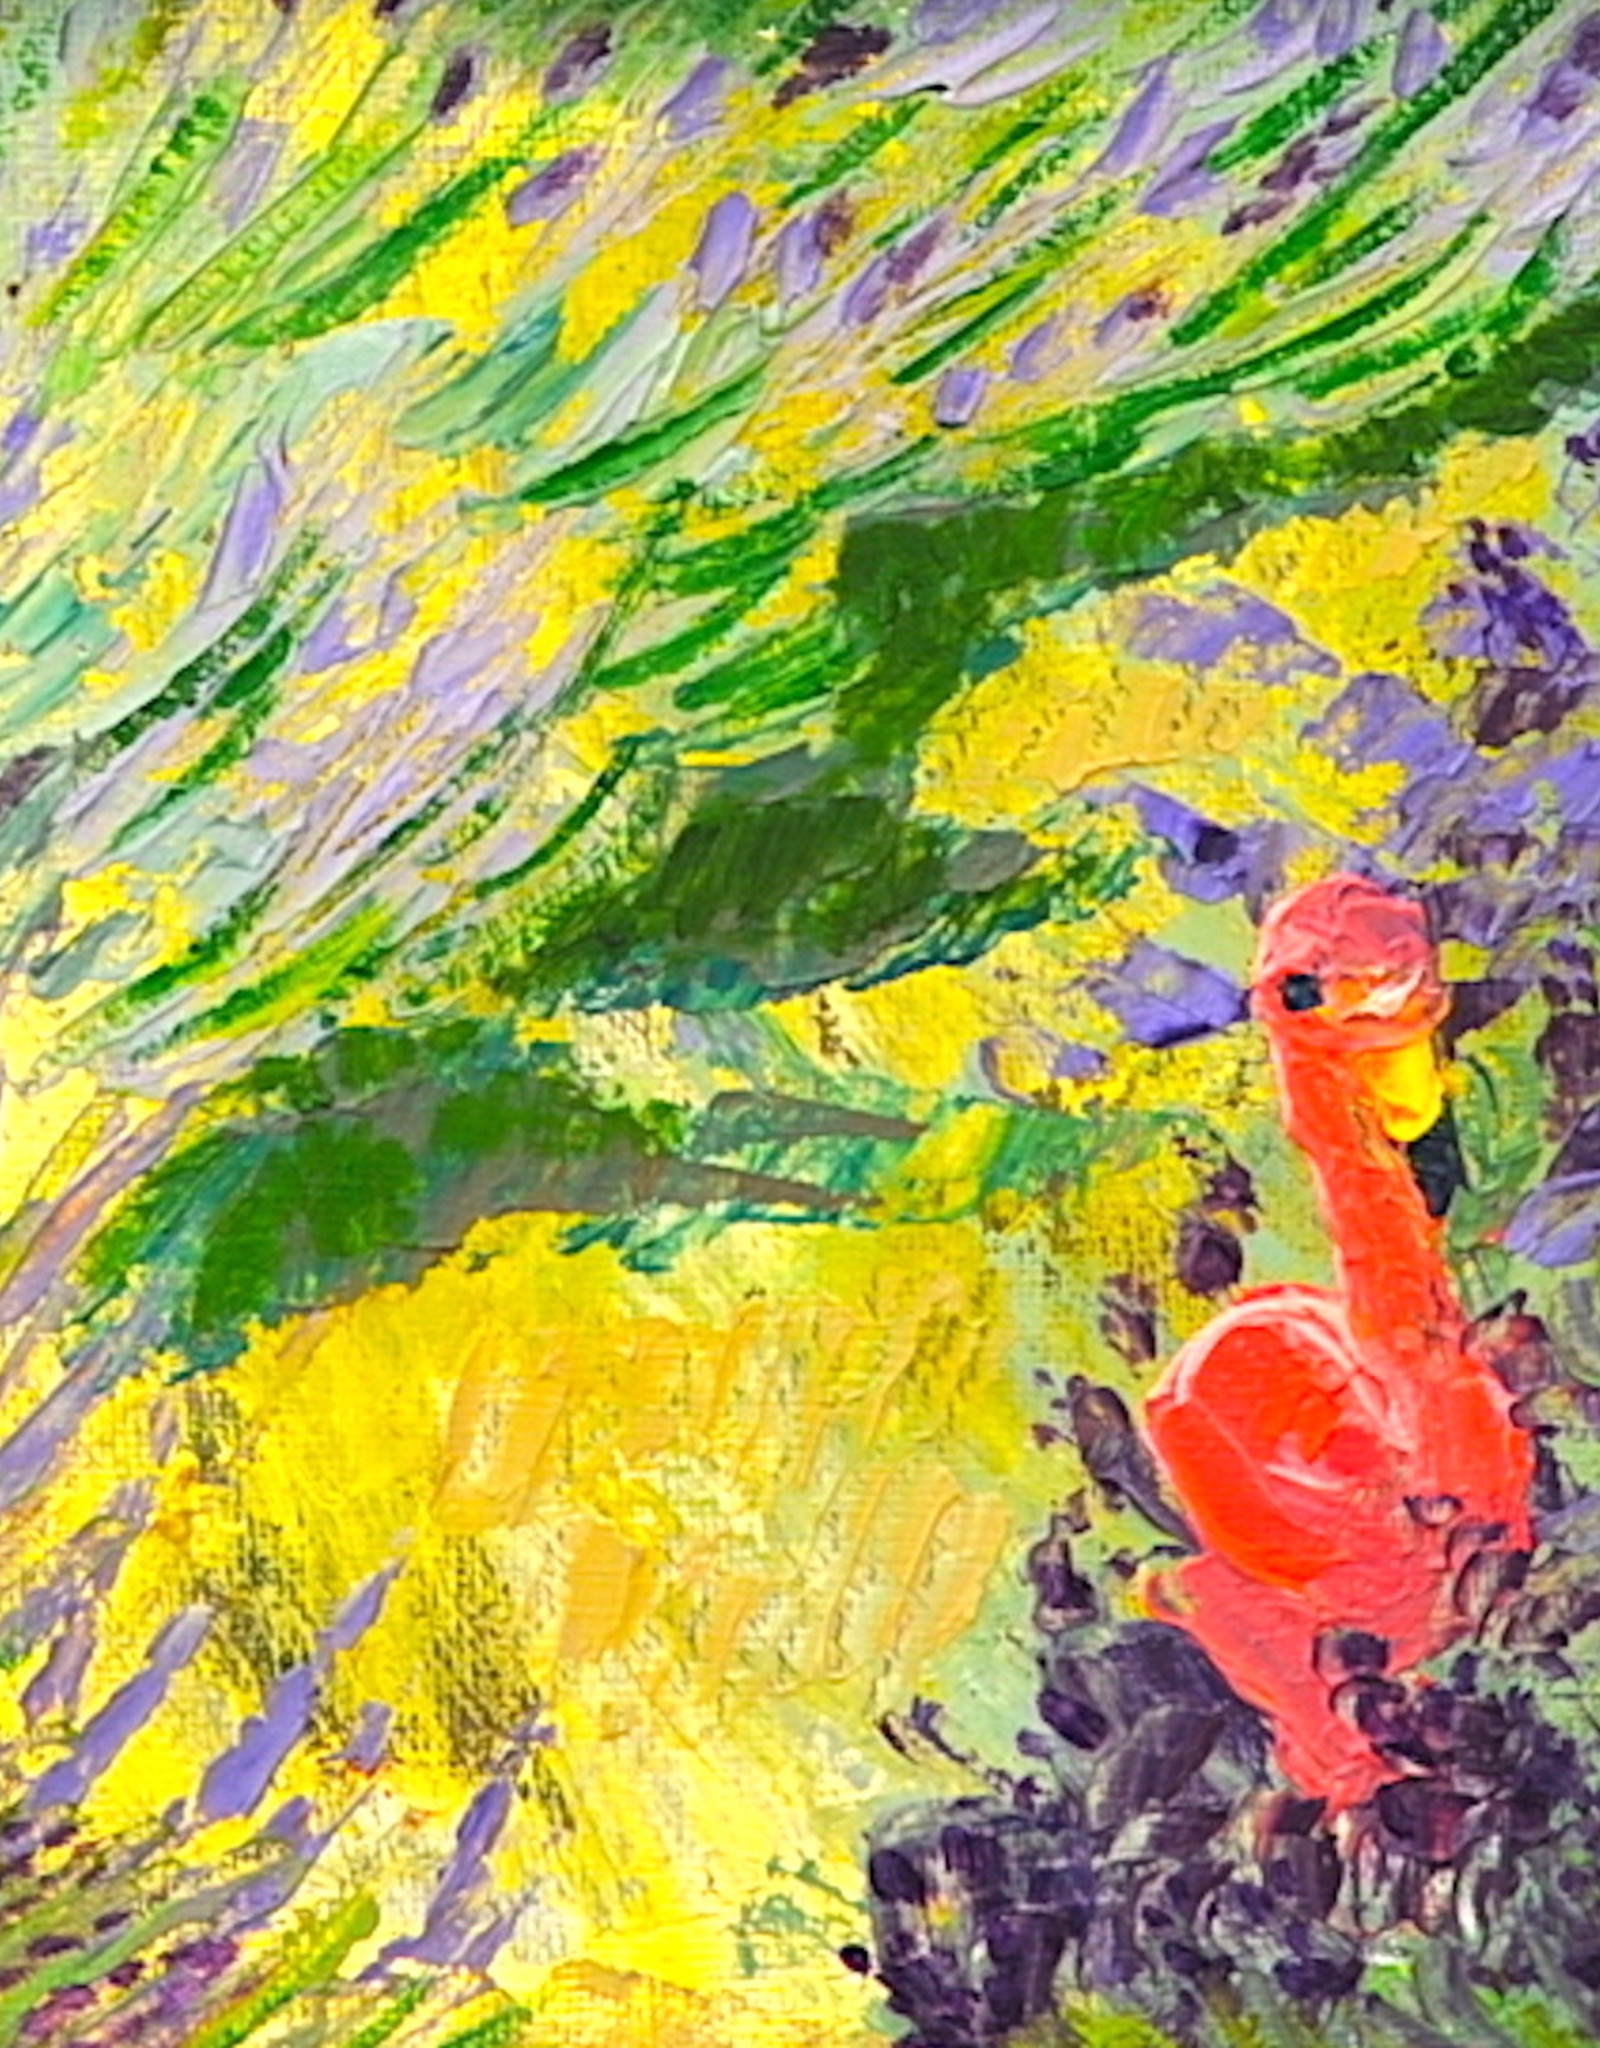 Nancy Smith Klos Pink Flamingo in Lavender oil painting